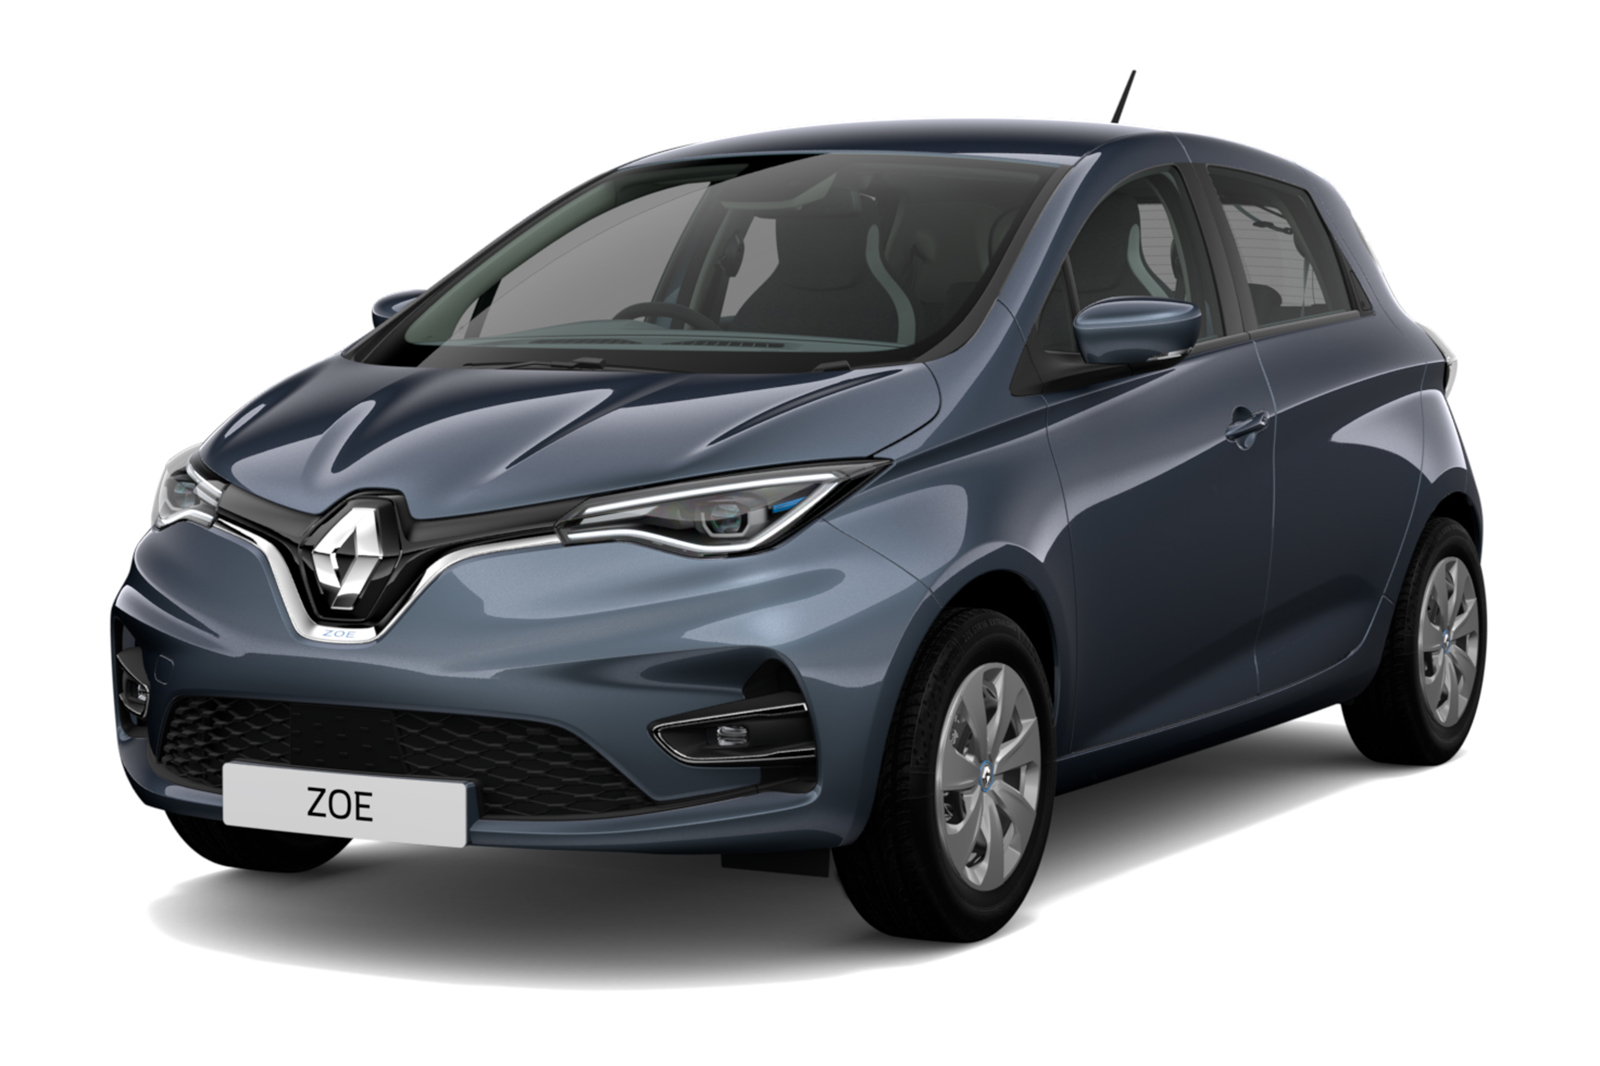 Renault Zoe gains new Venture Edition for 2021